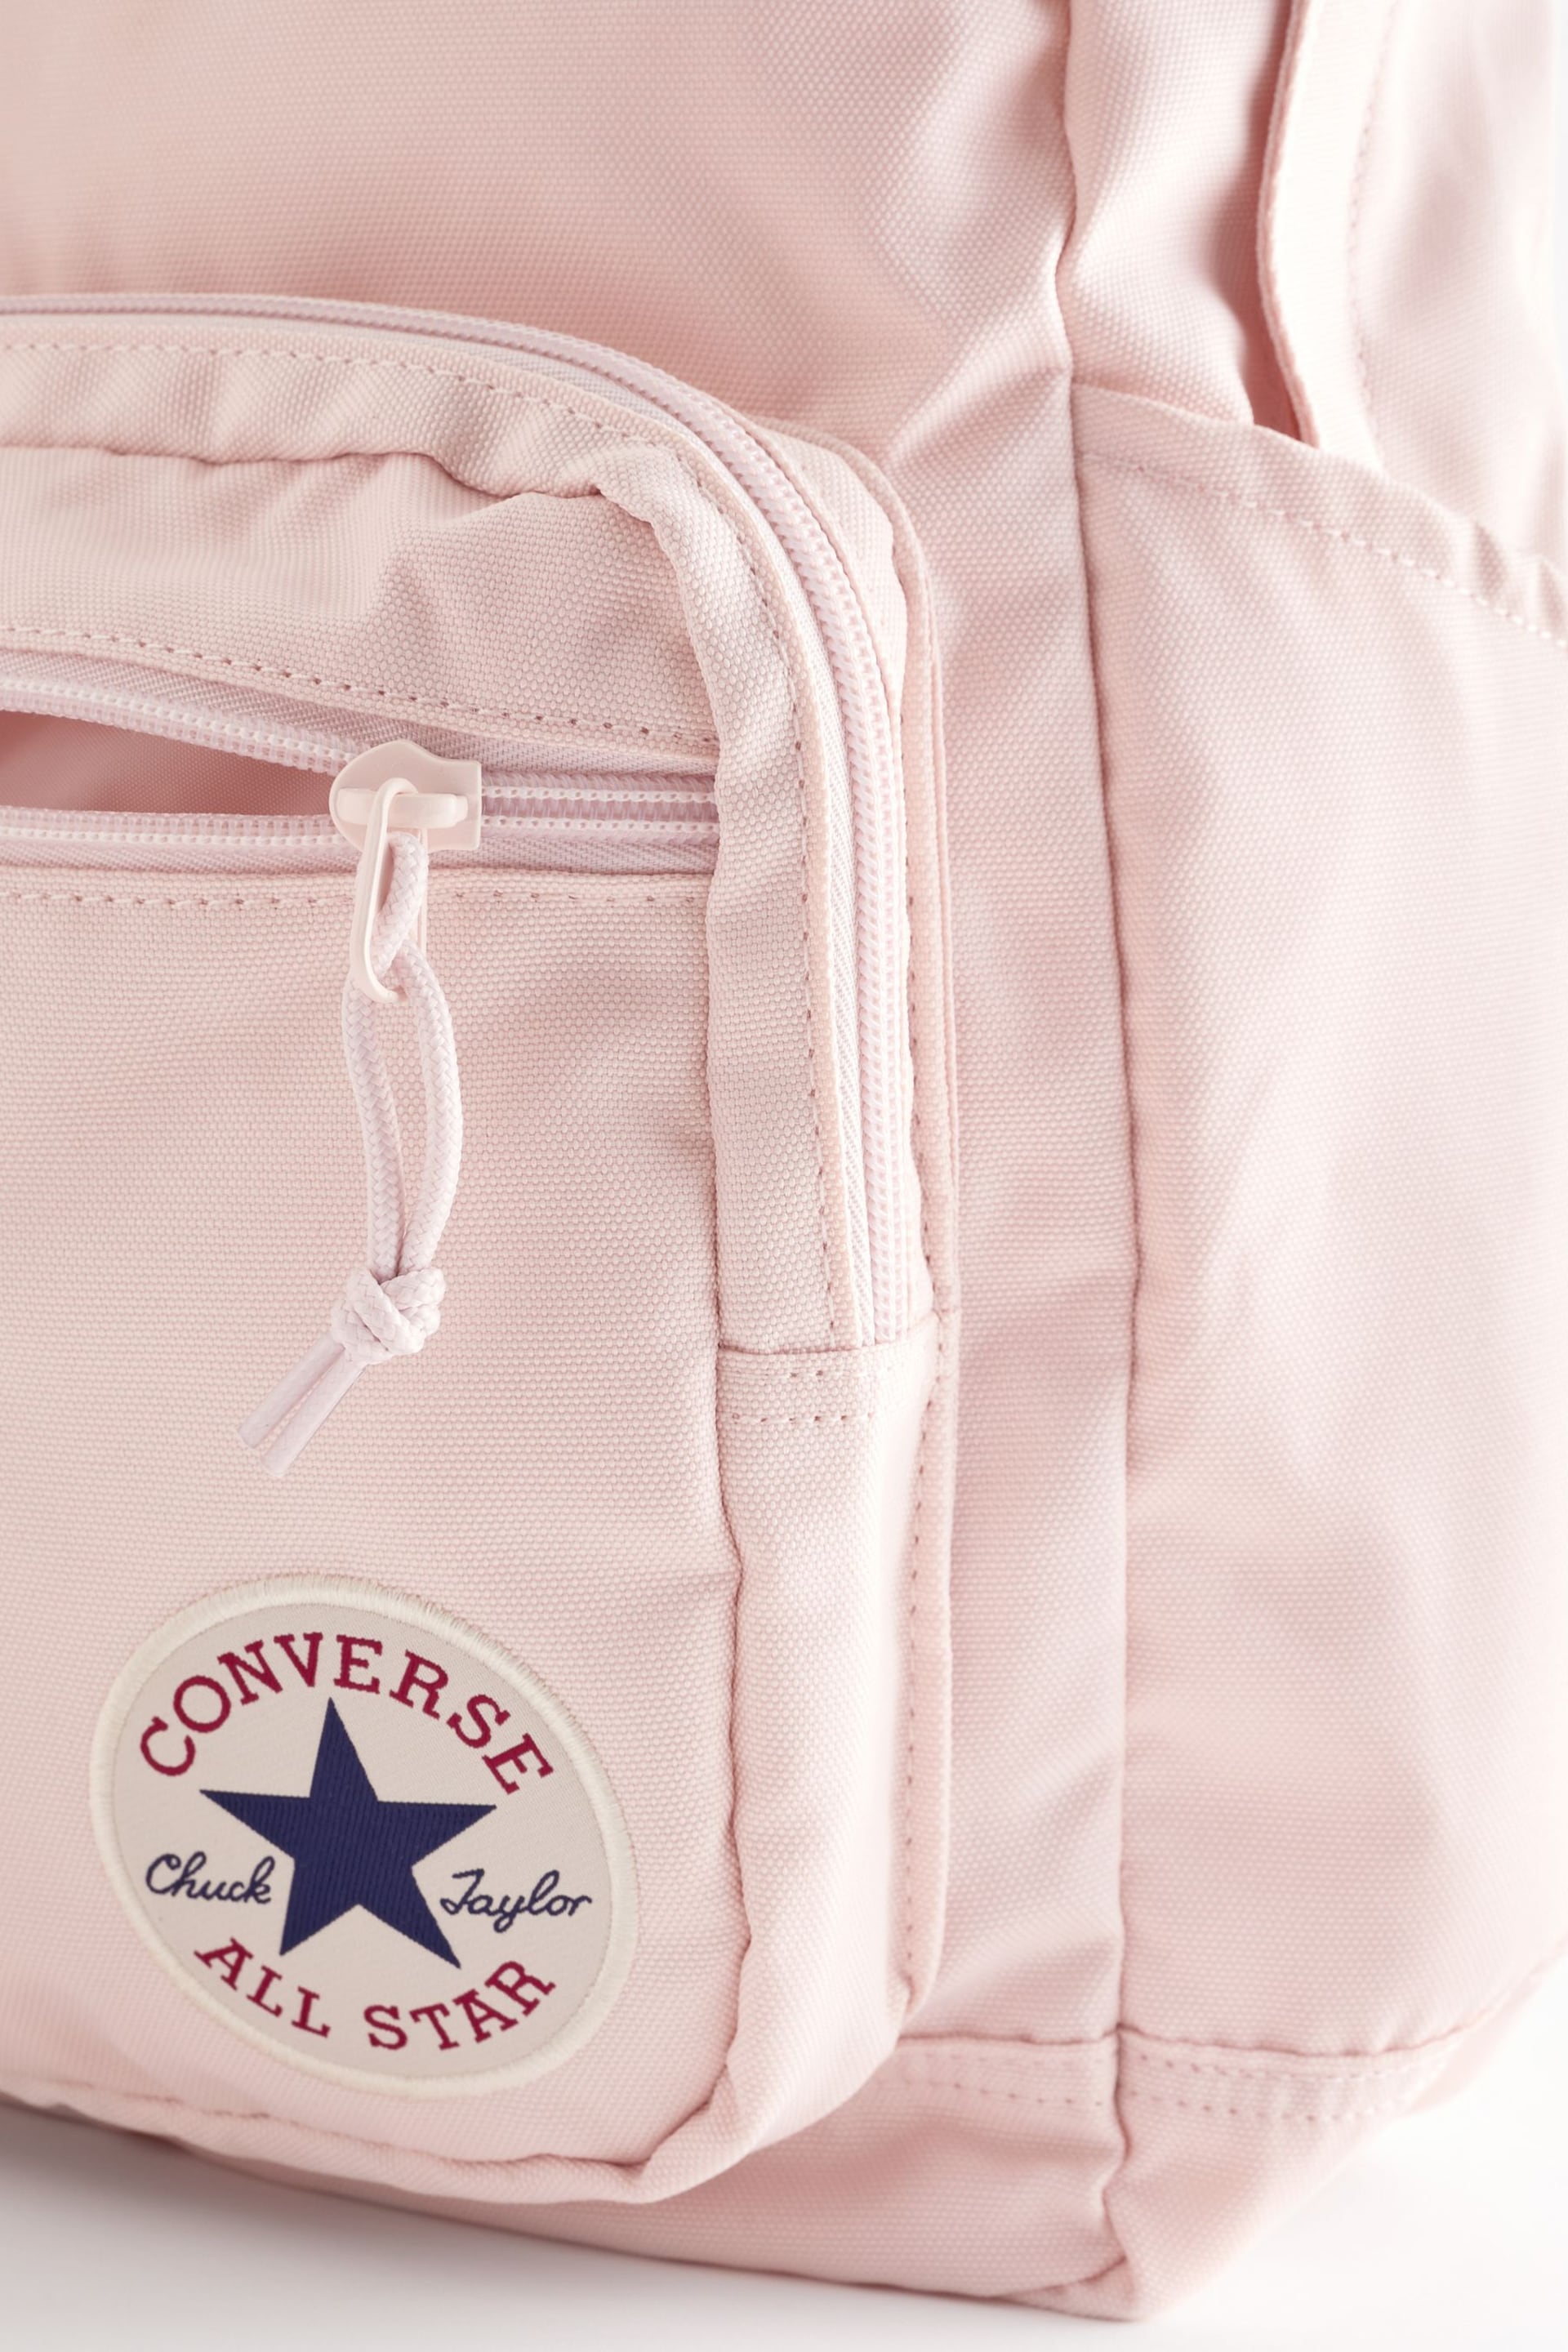 Converse Pink Converse Black Go 2 Backpack - Image 3 of 6